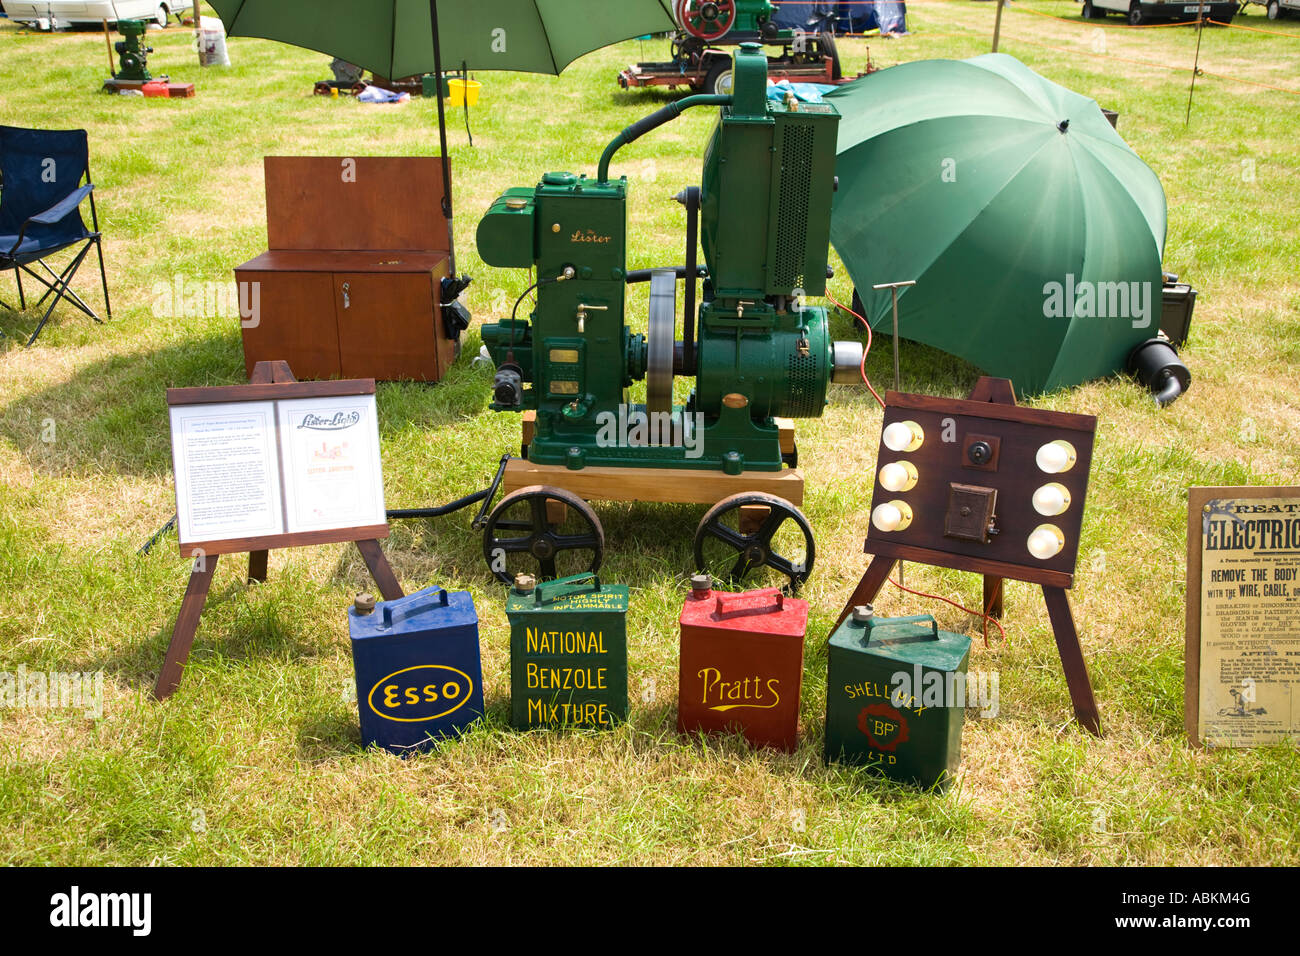 Wiltshire Steam Vintage Rally 2007 Lister stationary engine Stock Photo